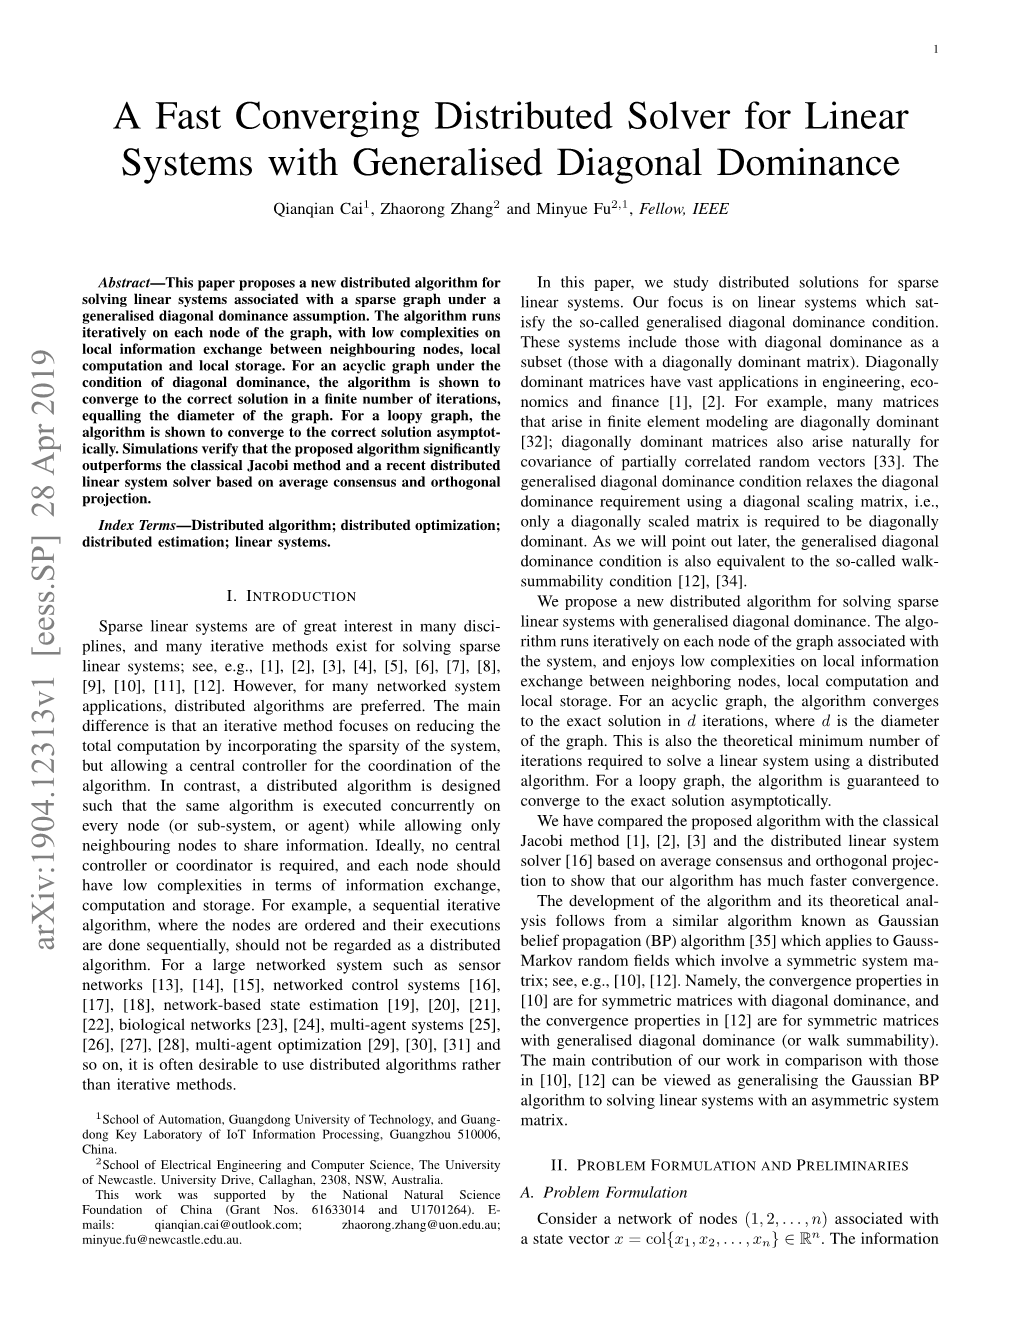 A Fast Converging Distributed Solver for Linear Systems with Generalised Diagonal Dominance